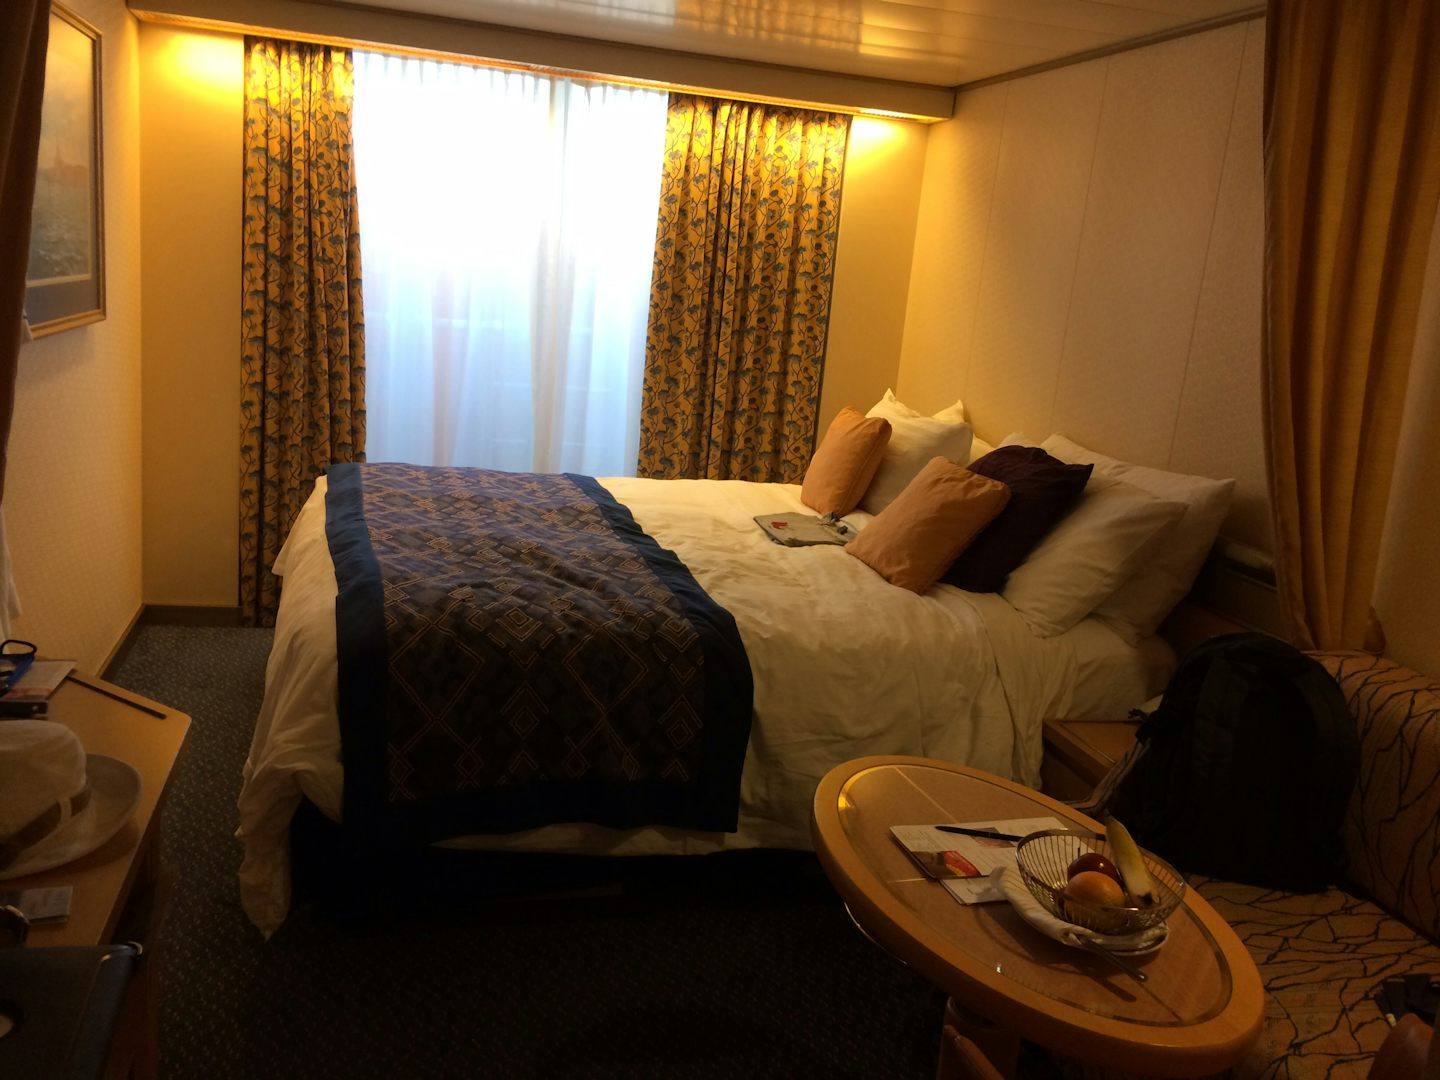 Large window makes up for the obstructed view, Noordam 4065